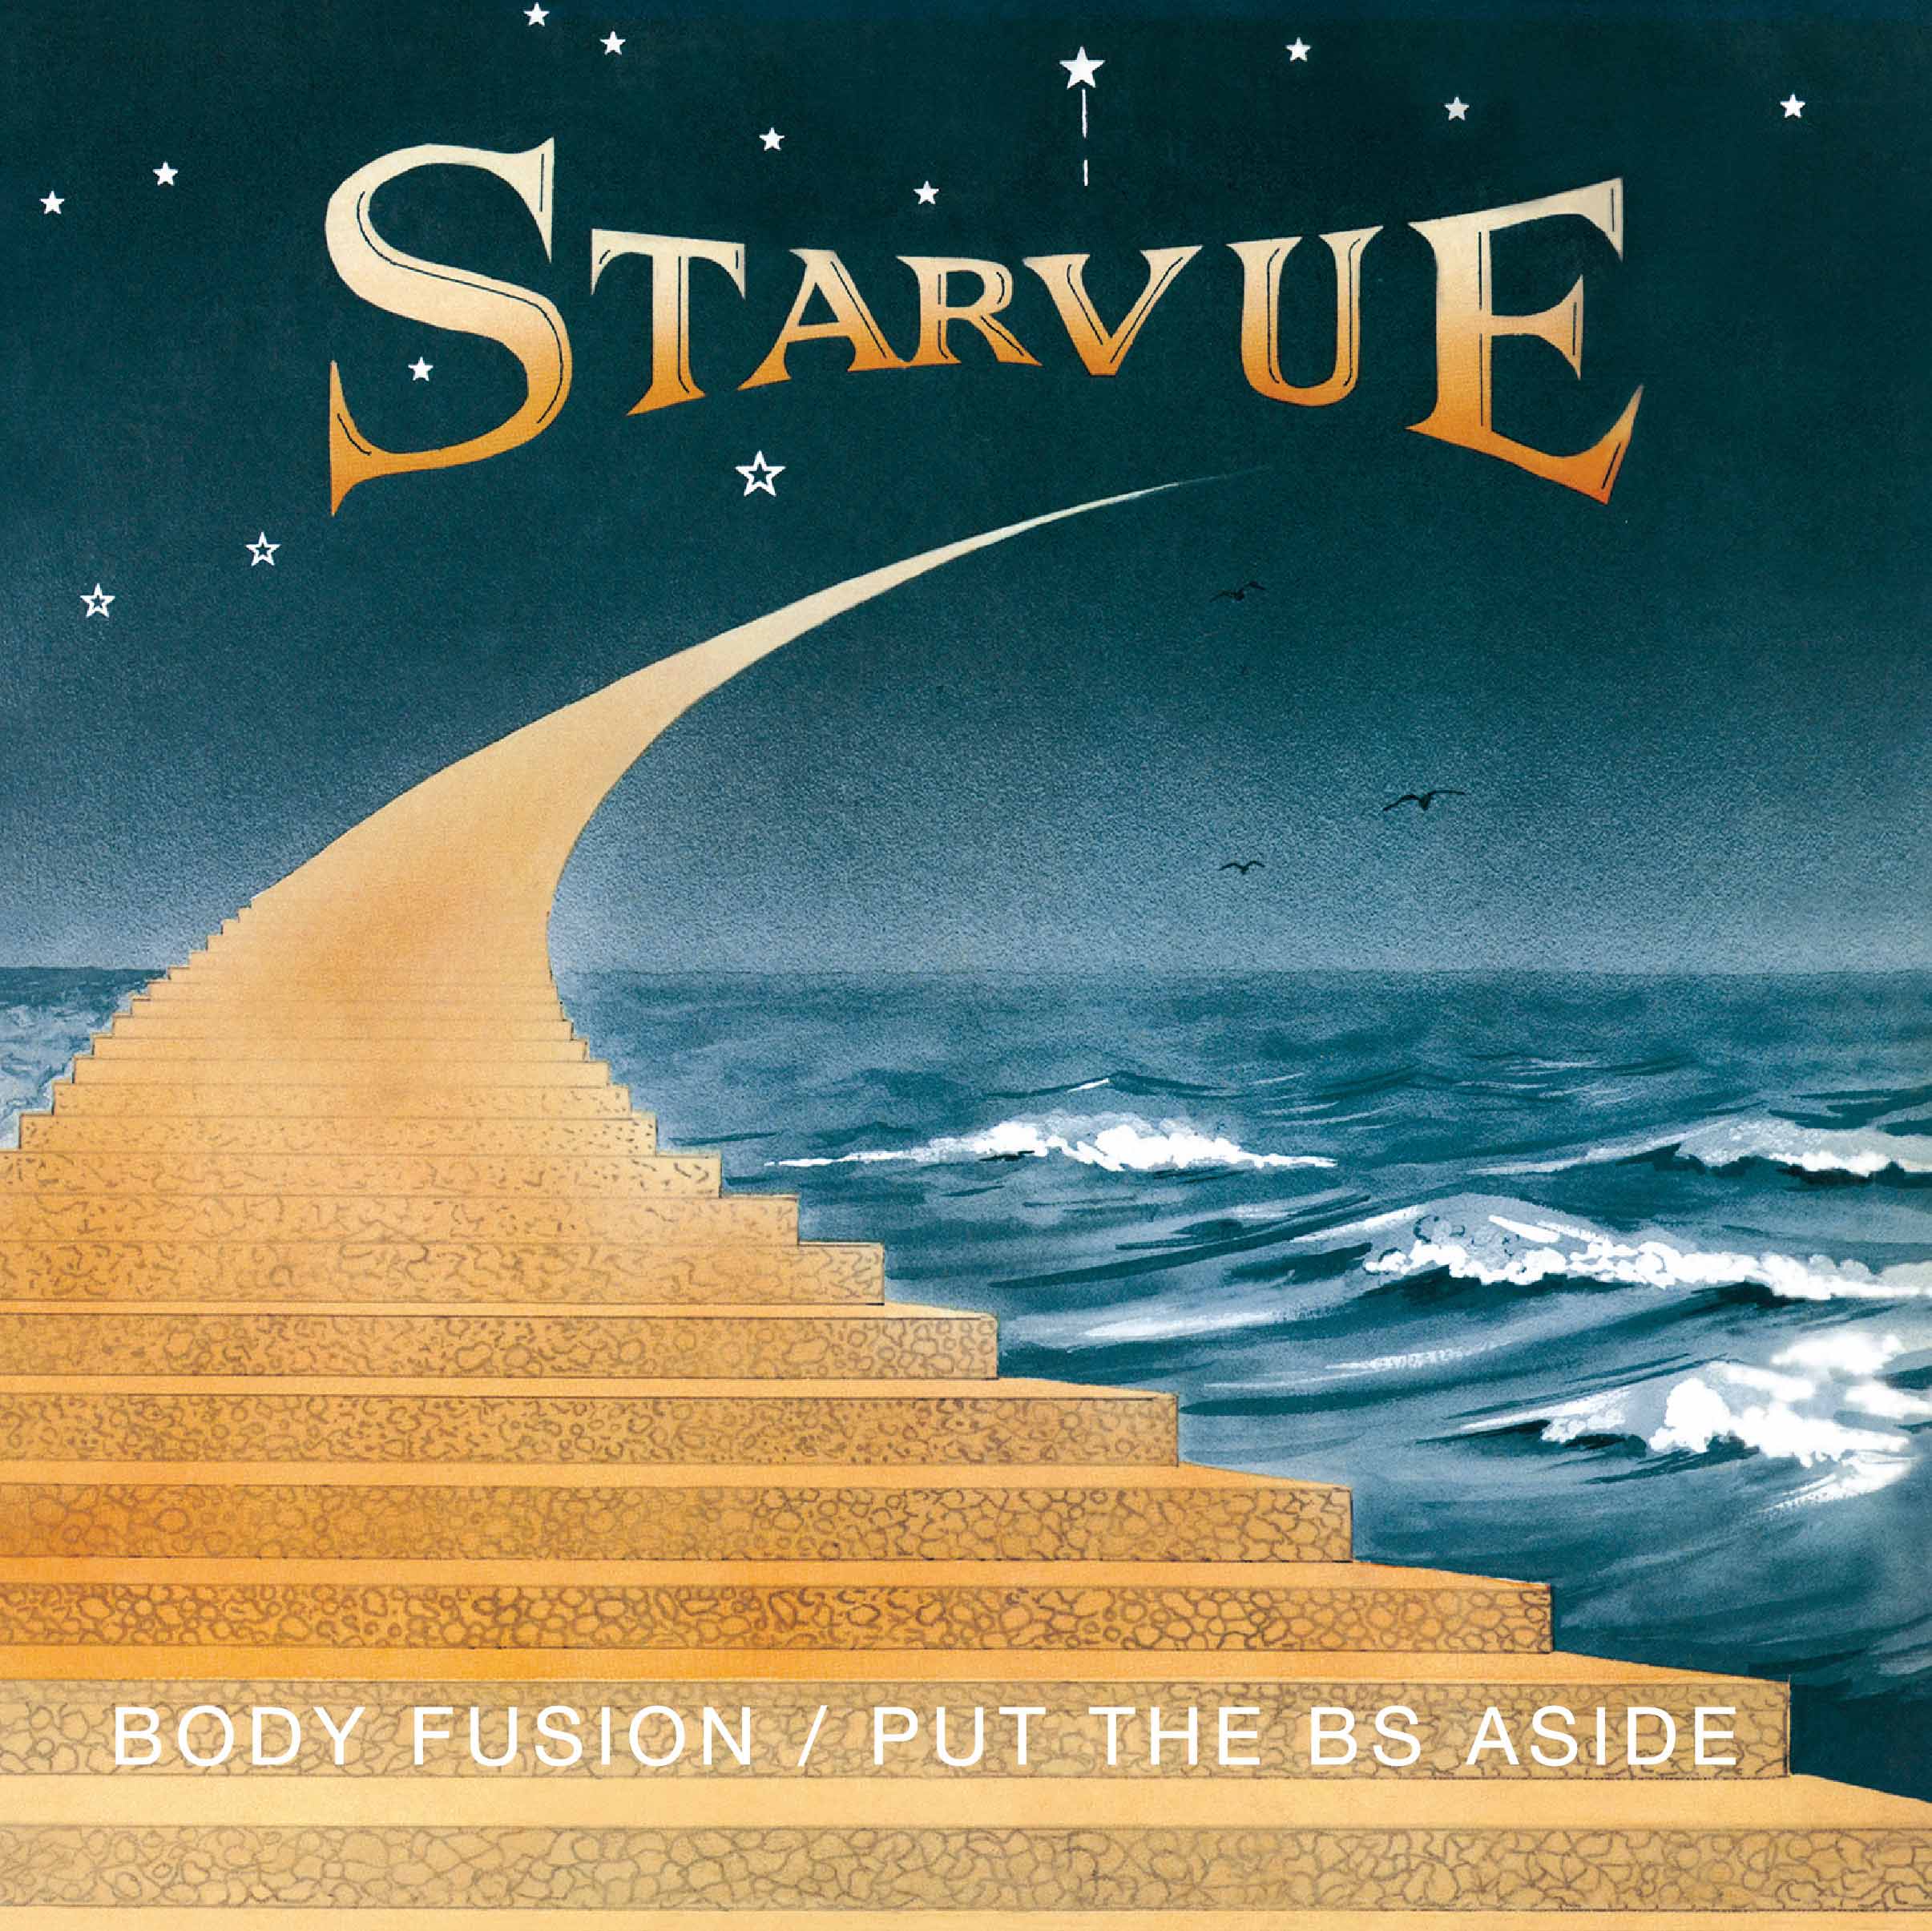 STARVUE「Body Fusion / Put The BS Aside」